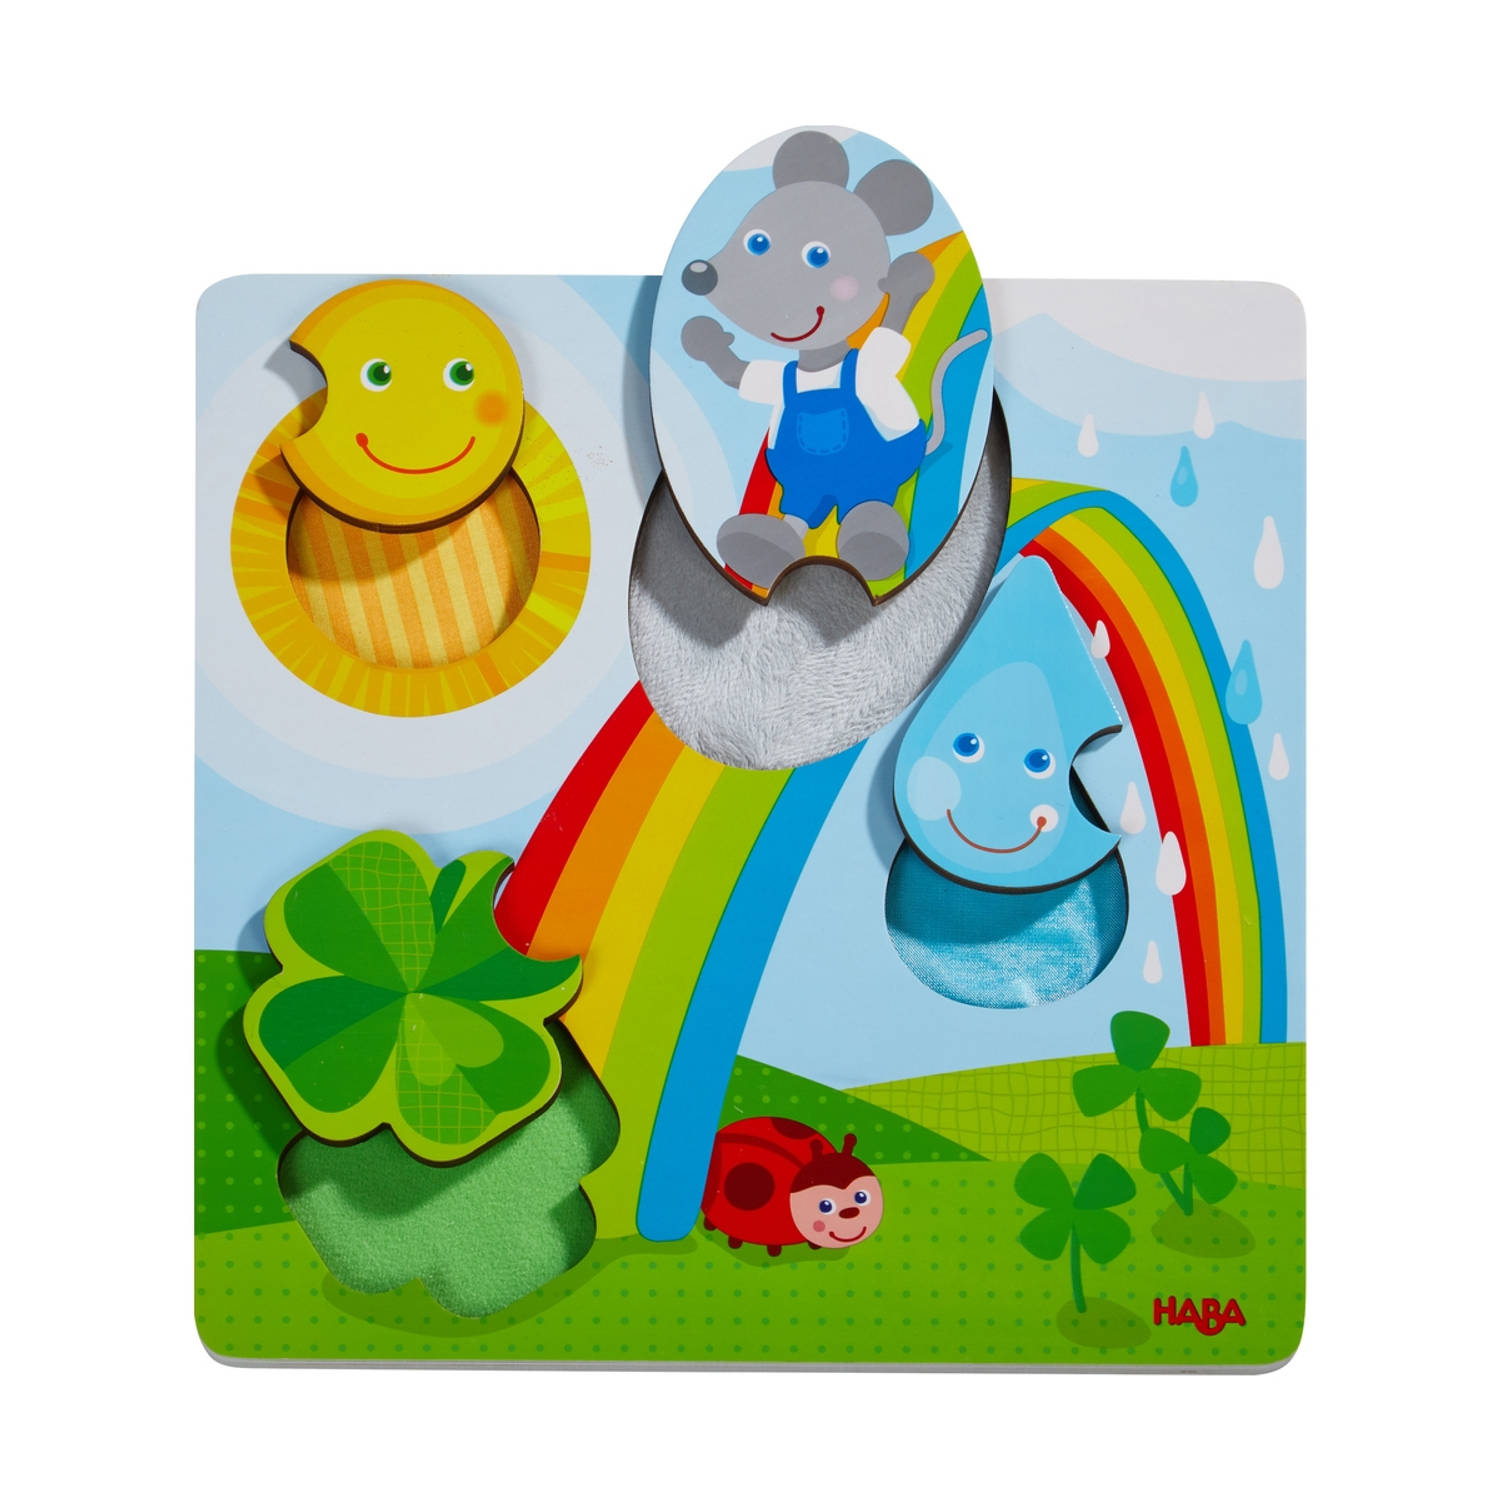 Haba voelpuzzel muis 25 x 25 cm polyester 2 delig